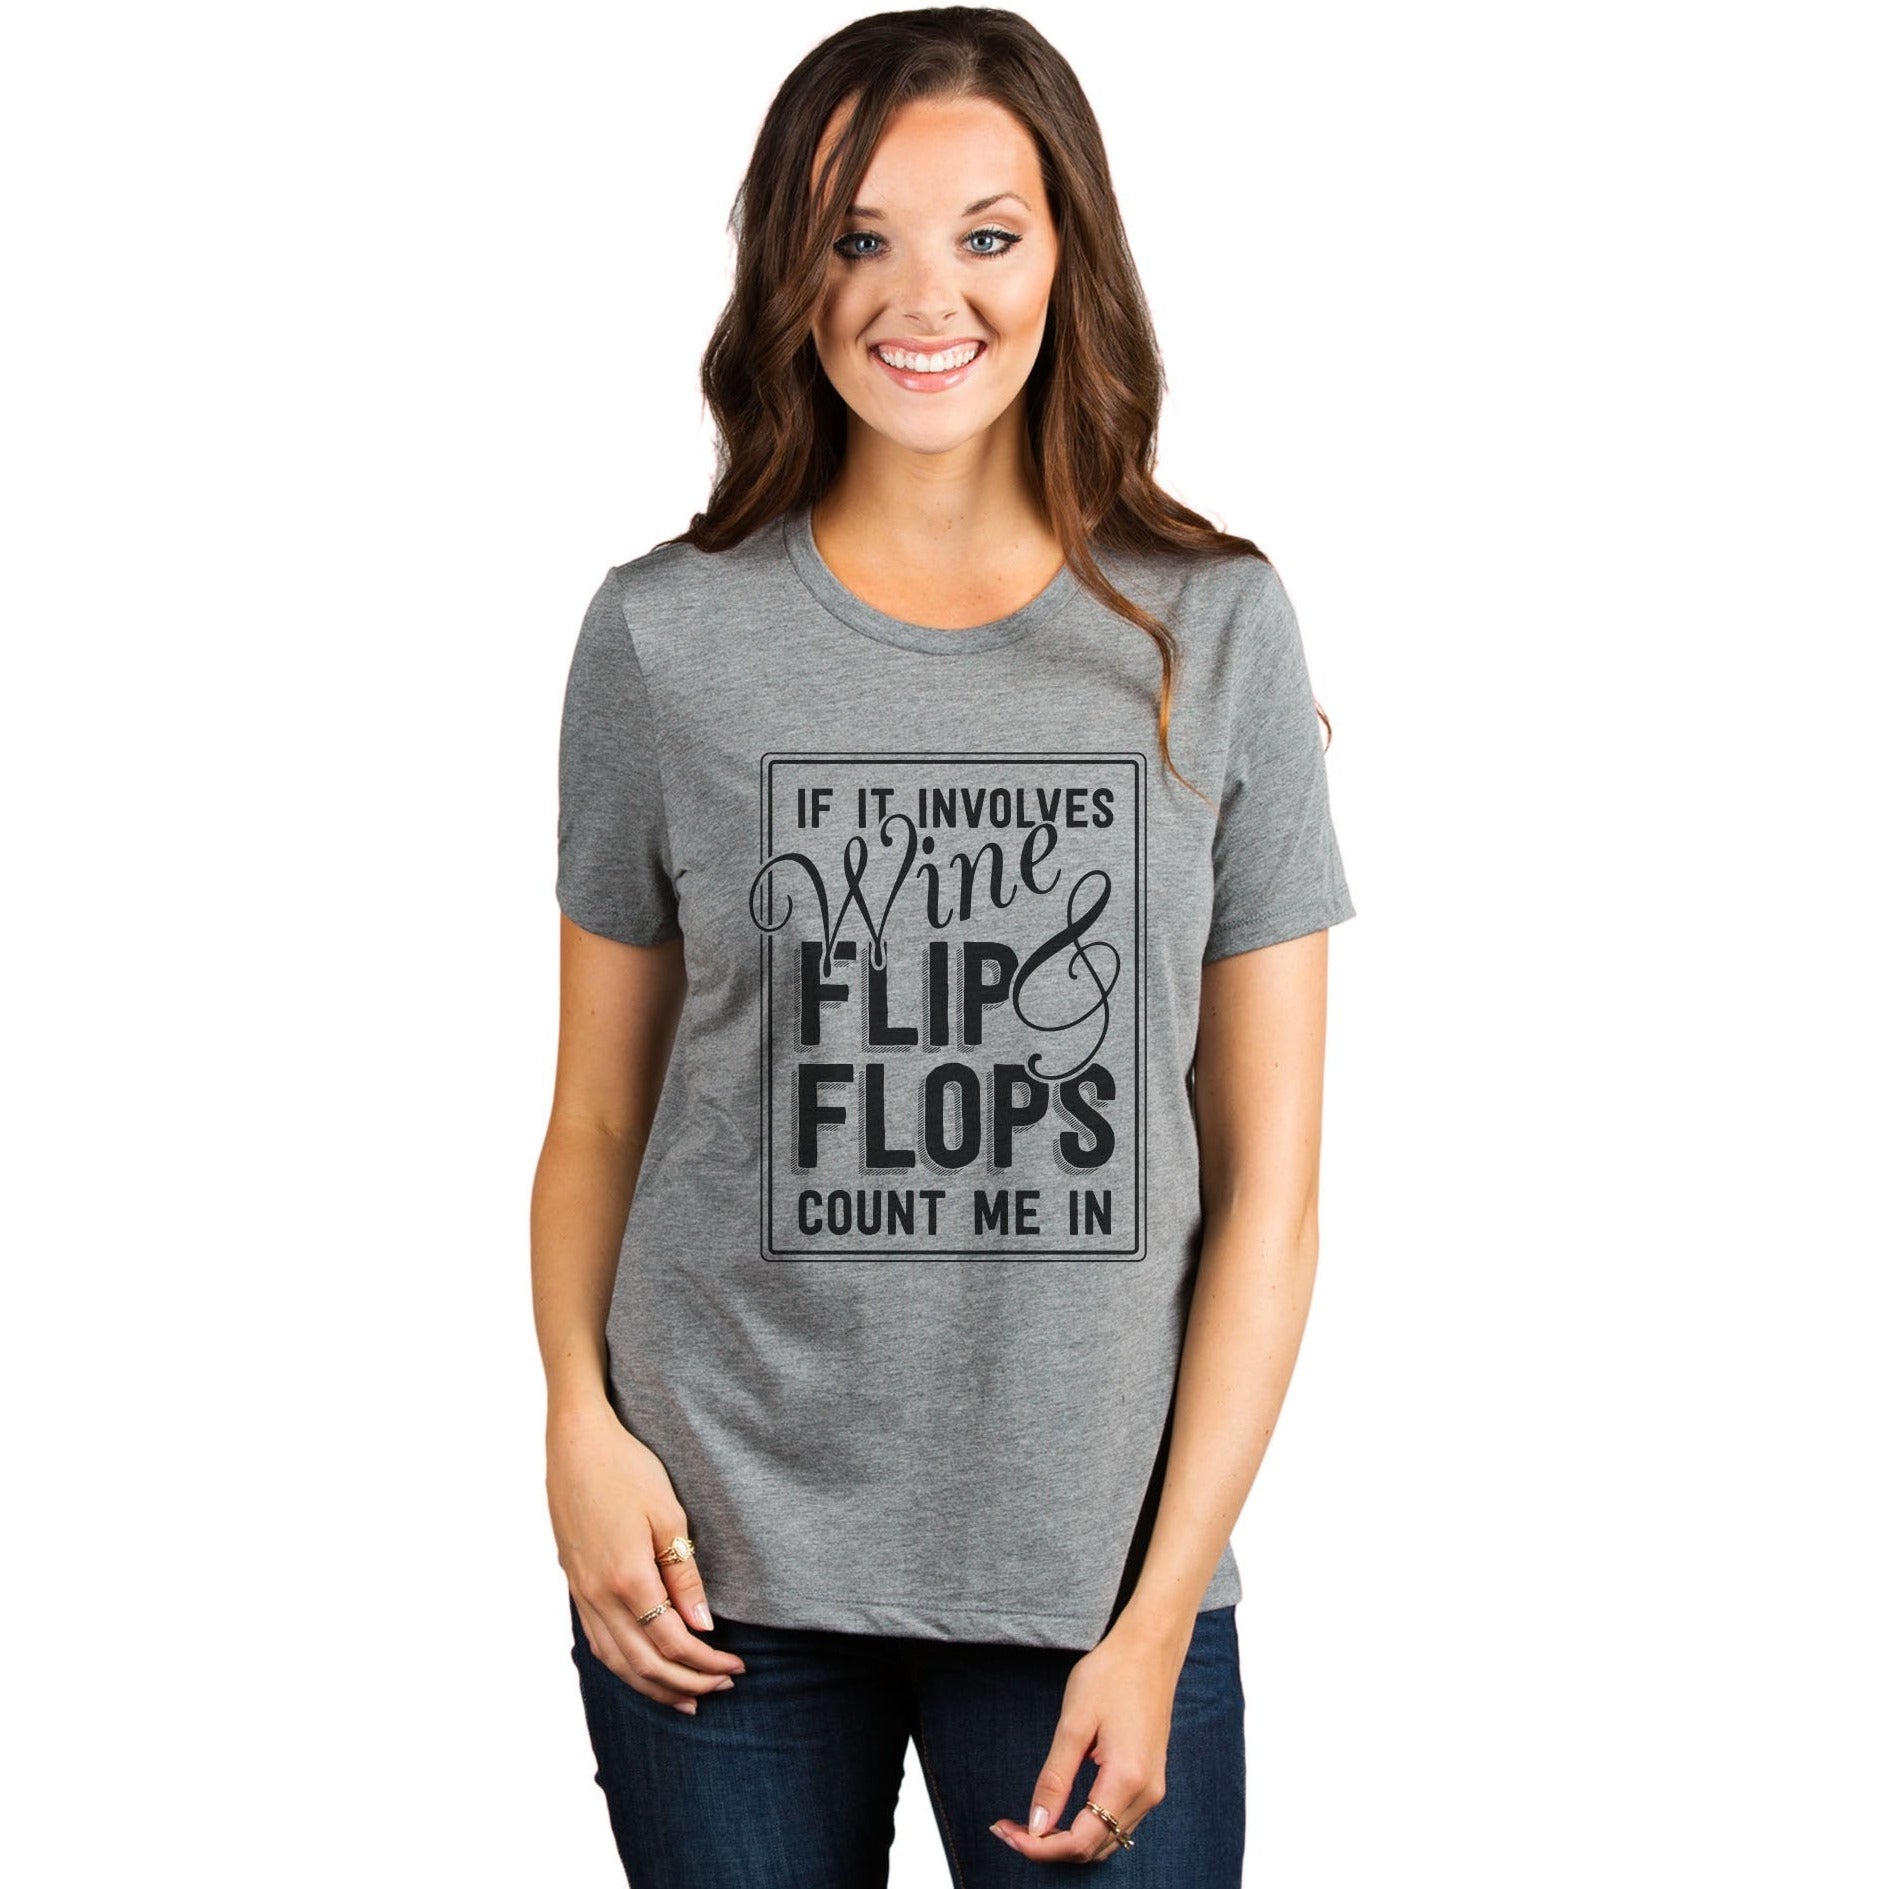 If It Involves Wine And Flip Flops Count Me In Women's Relaxed Crewneck T-Shirt Top Tee Heather Grey Model
